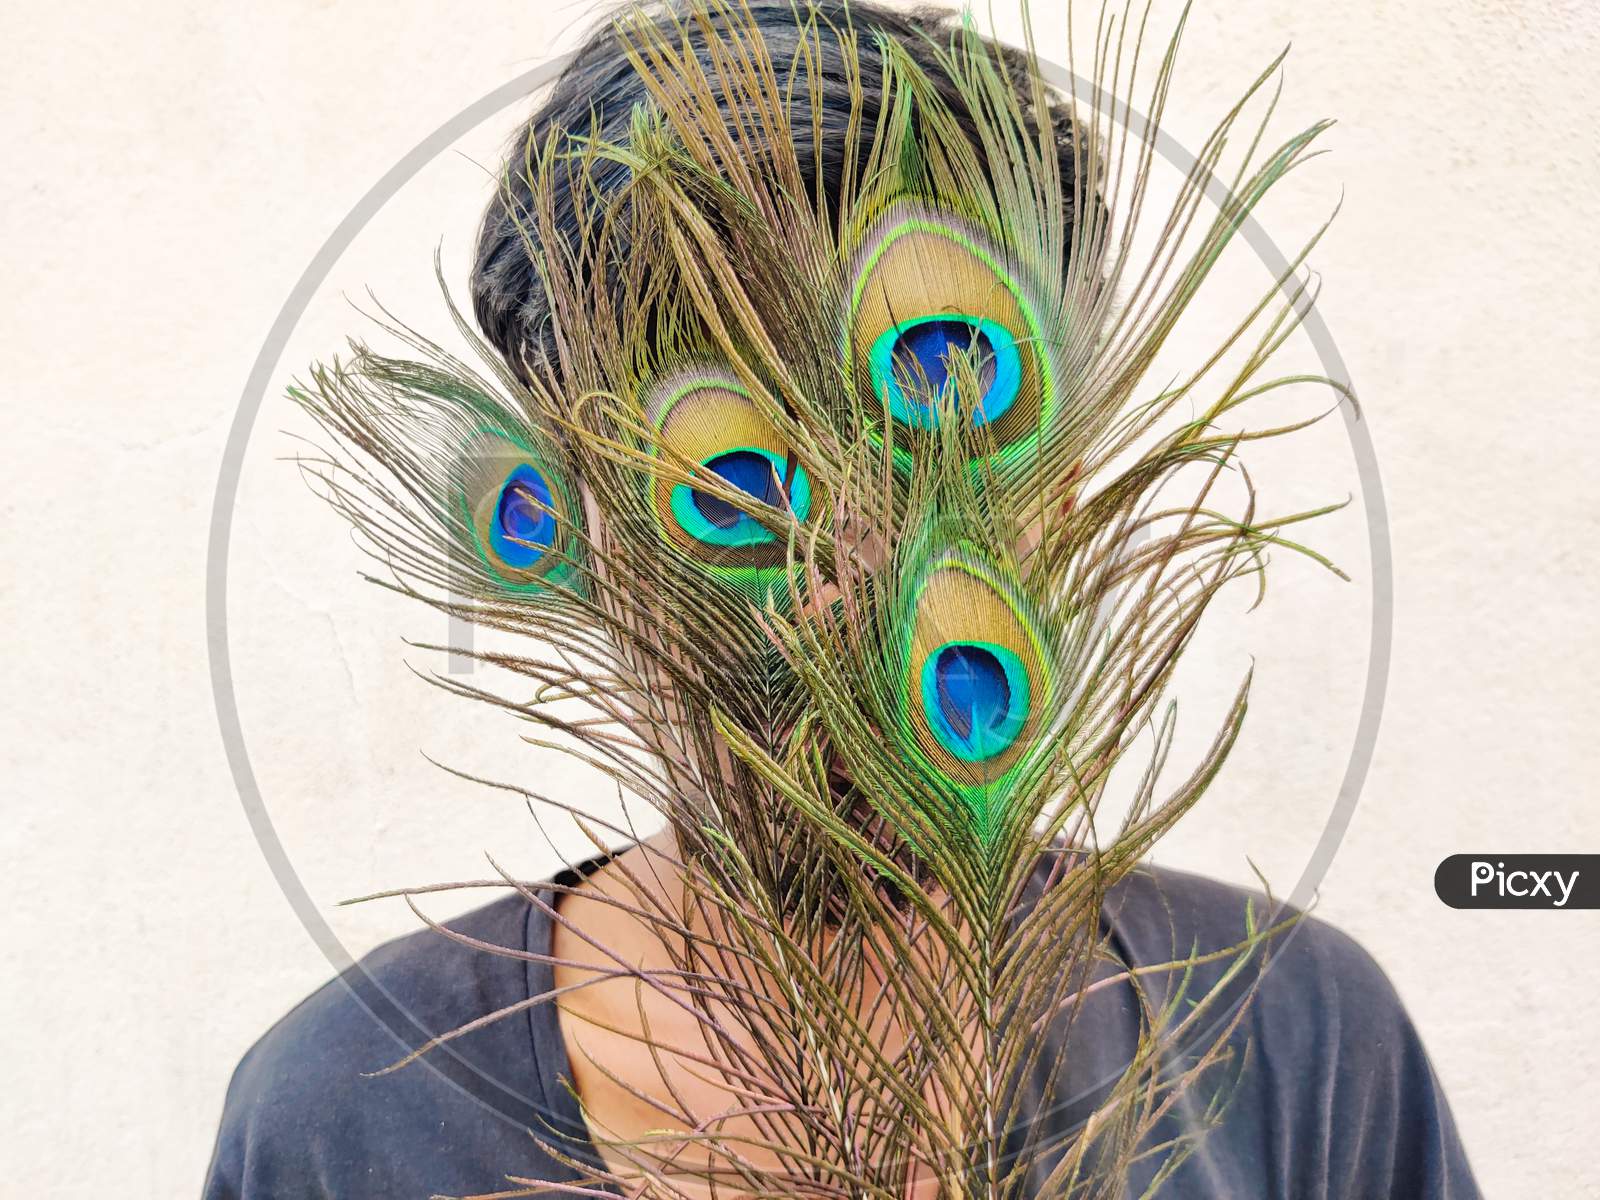 South Indian Man Covering His Face With Beautiful Peacock Feathers. Isolated On Black Background.